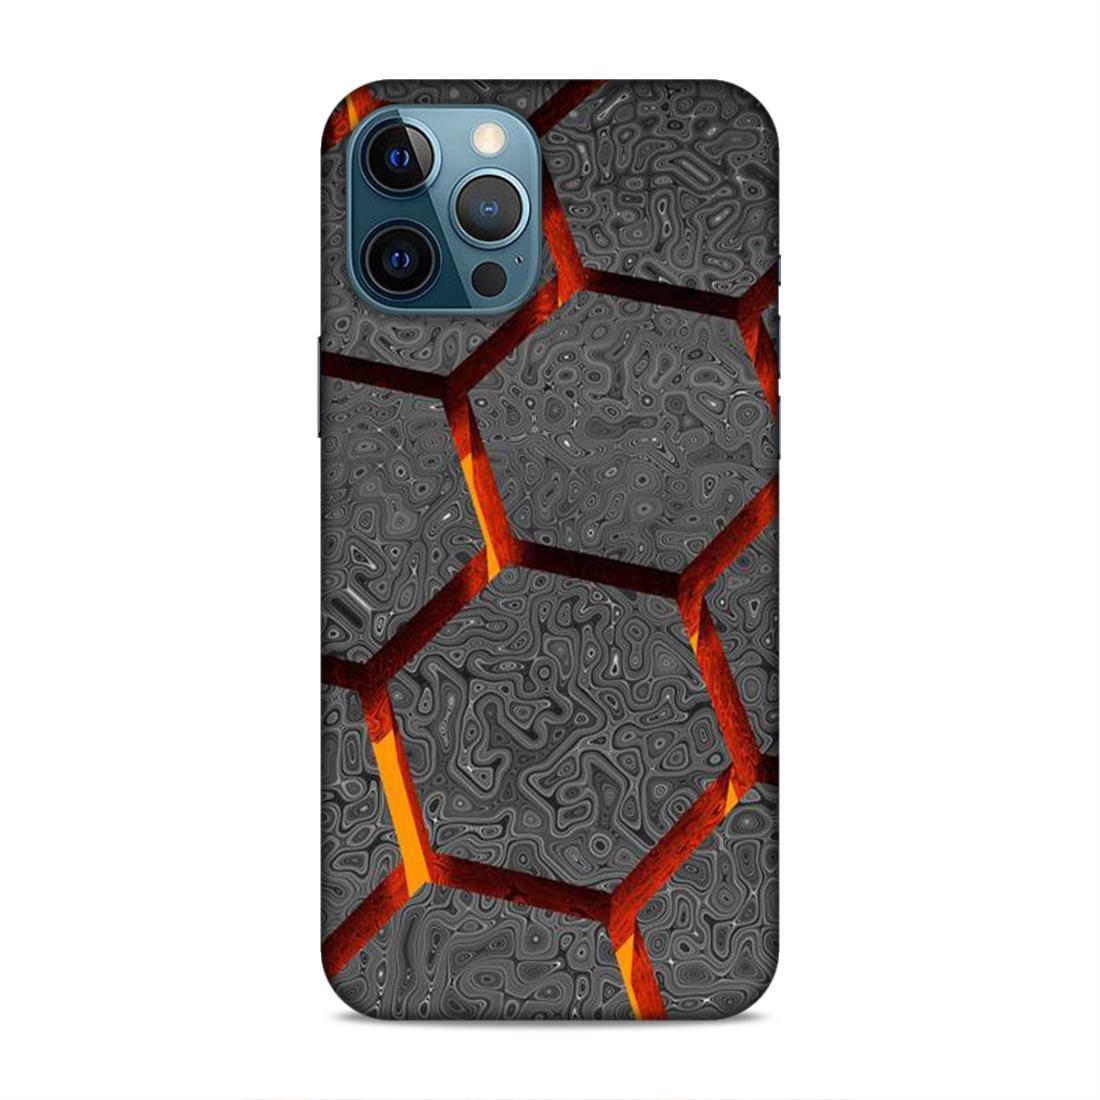 Hexagon Pattern iPhone 12 Pro Max Phone Case Cover